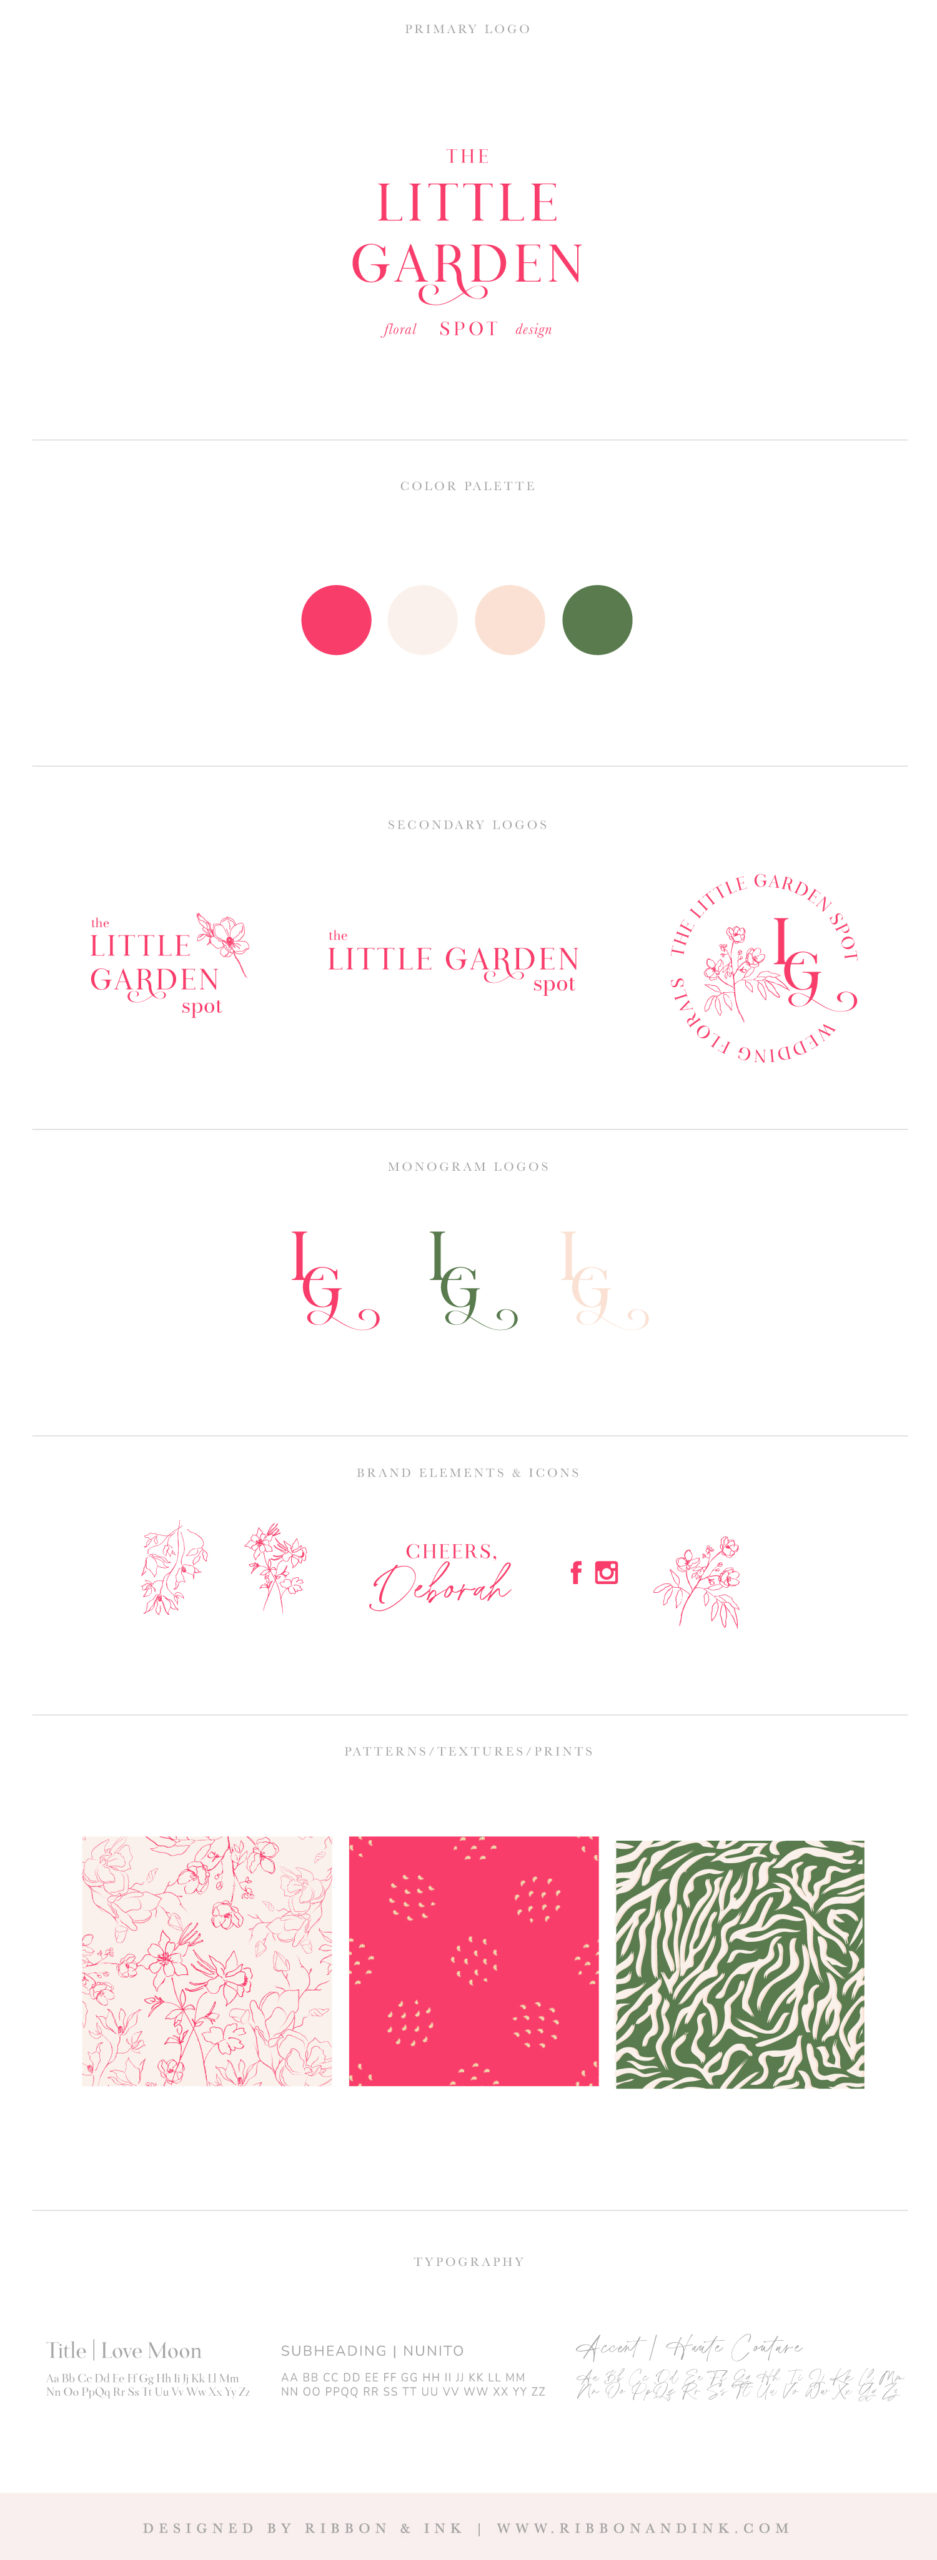 brand board / branding identity / branding for creatives and wedding businesses / wedding florist logo / colorful / pink / green